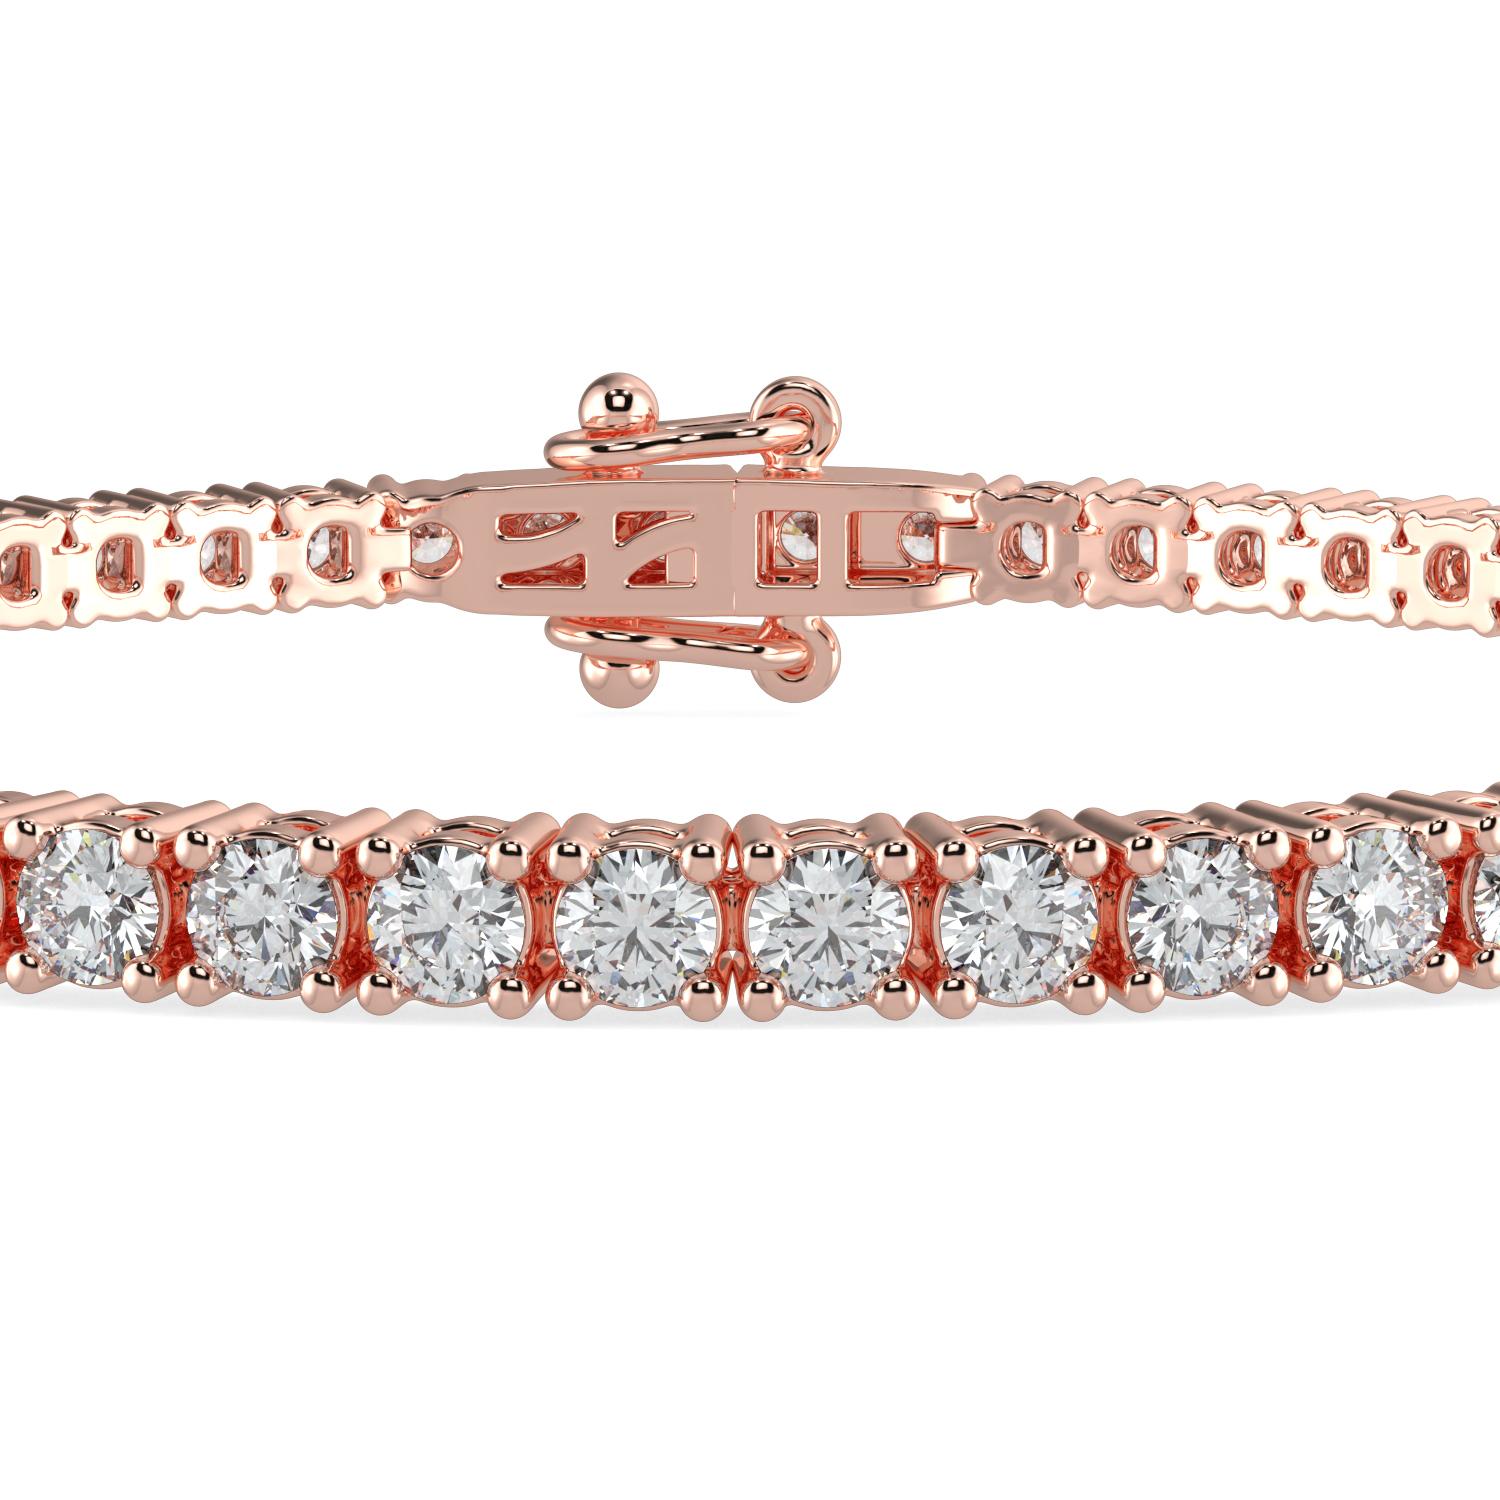 7.00 Carat Round Cut GH-I1 Natural Diamond Classic Tennis Bracelet 4 Prong 14K Rose Gold for Women

Specification
Brand: AAMIAA
Length: 7 Inches 
Color: GH
Carat Weight:7CTW
Clarity: I1

LUXURIOUS AND LASTING- Our bracelets are a luxurious and